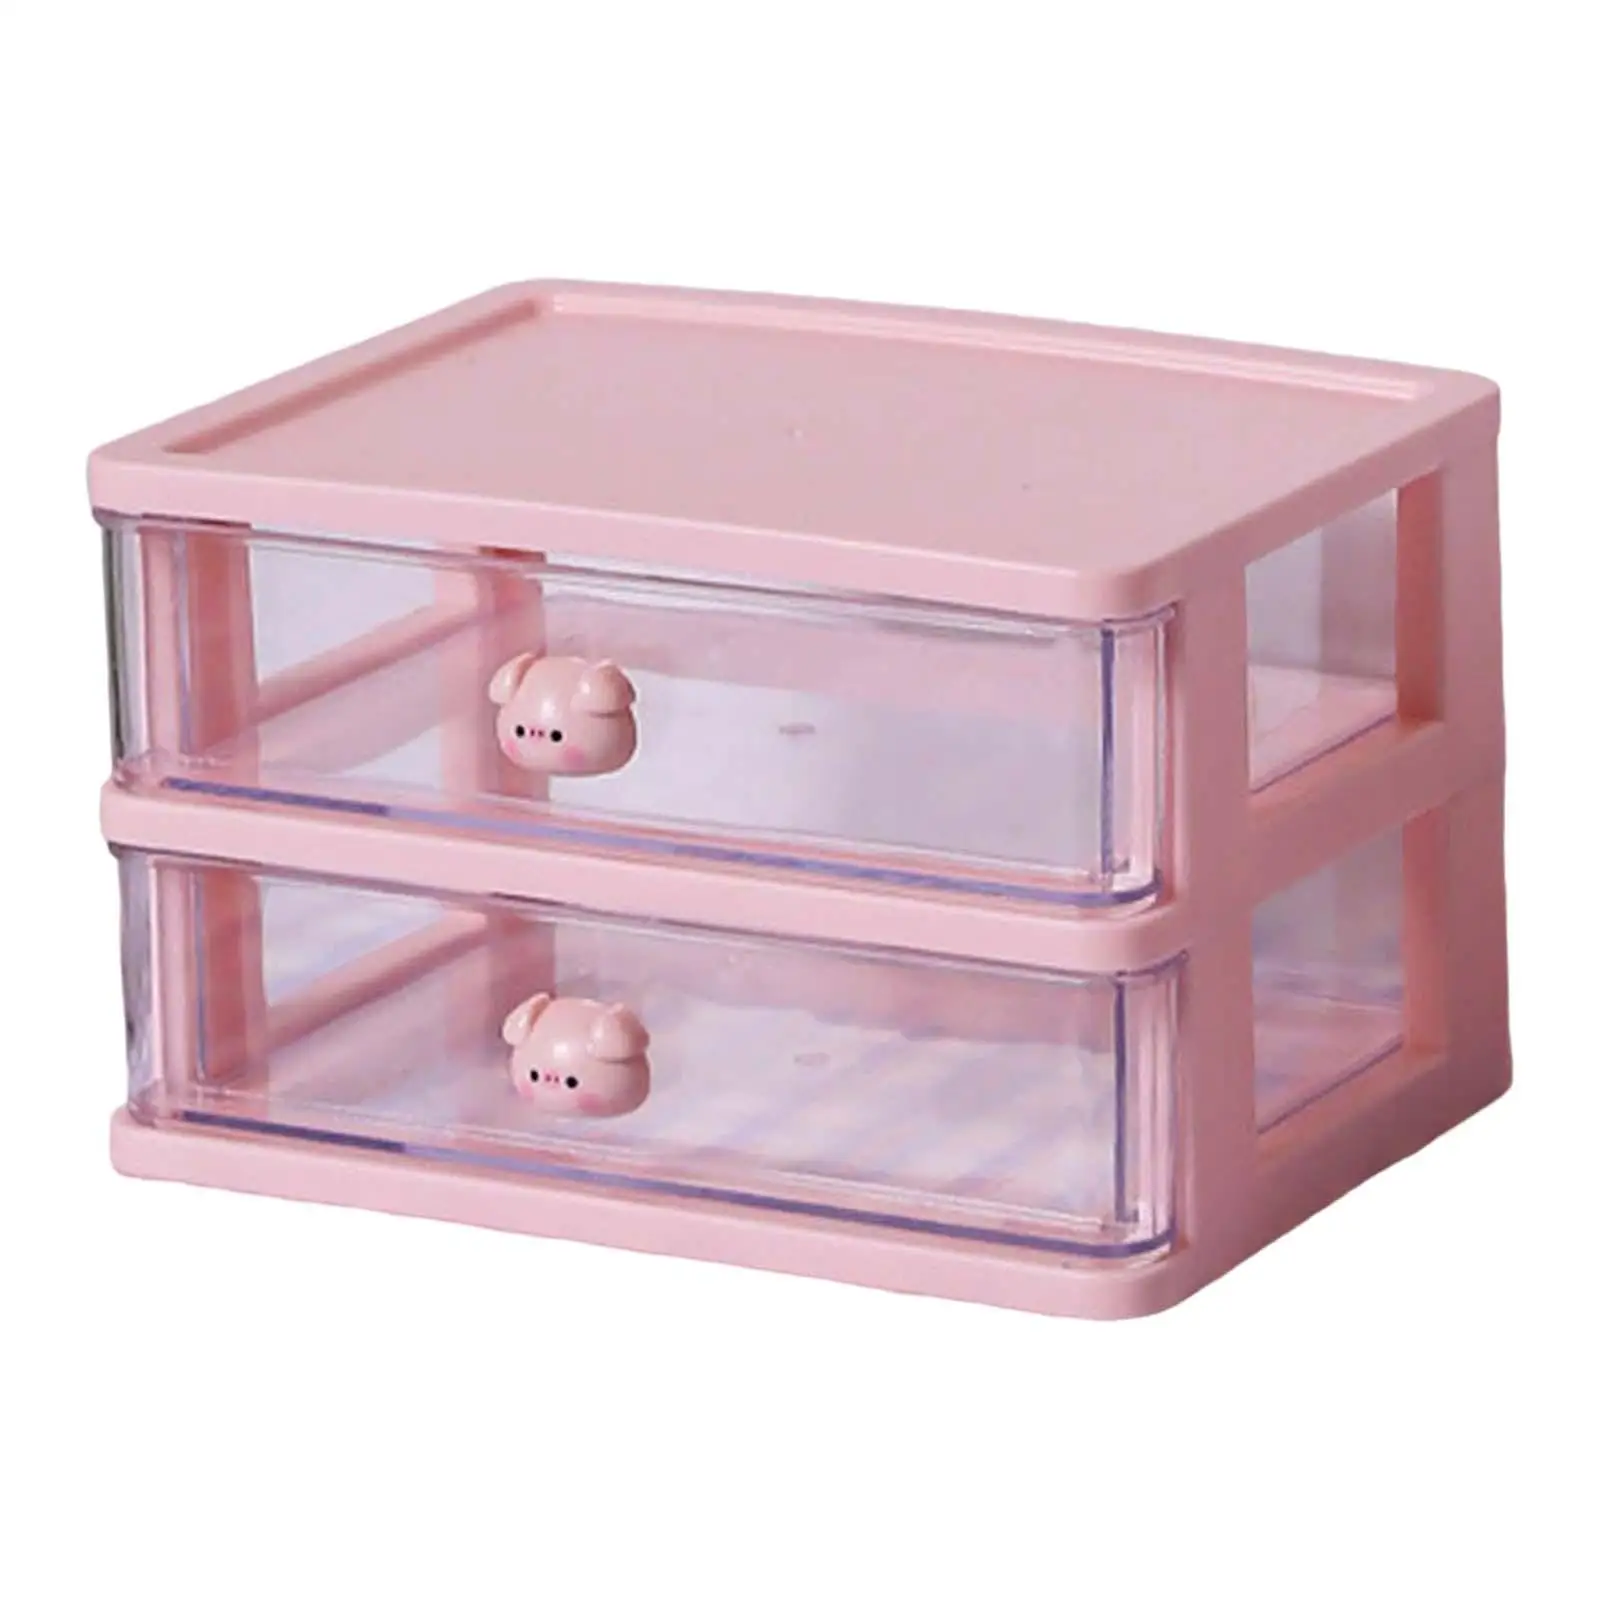 Desktop Drawer Organizer Compartments Storage Drawers Case Stackable for Home Bathroom